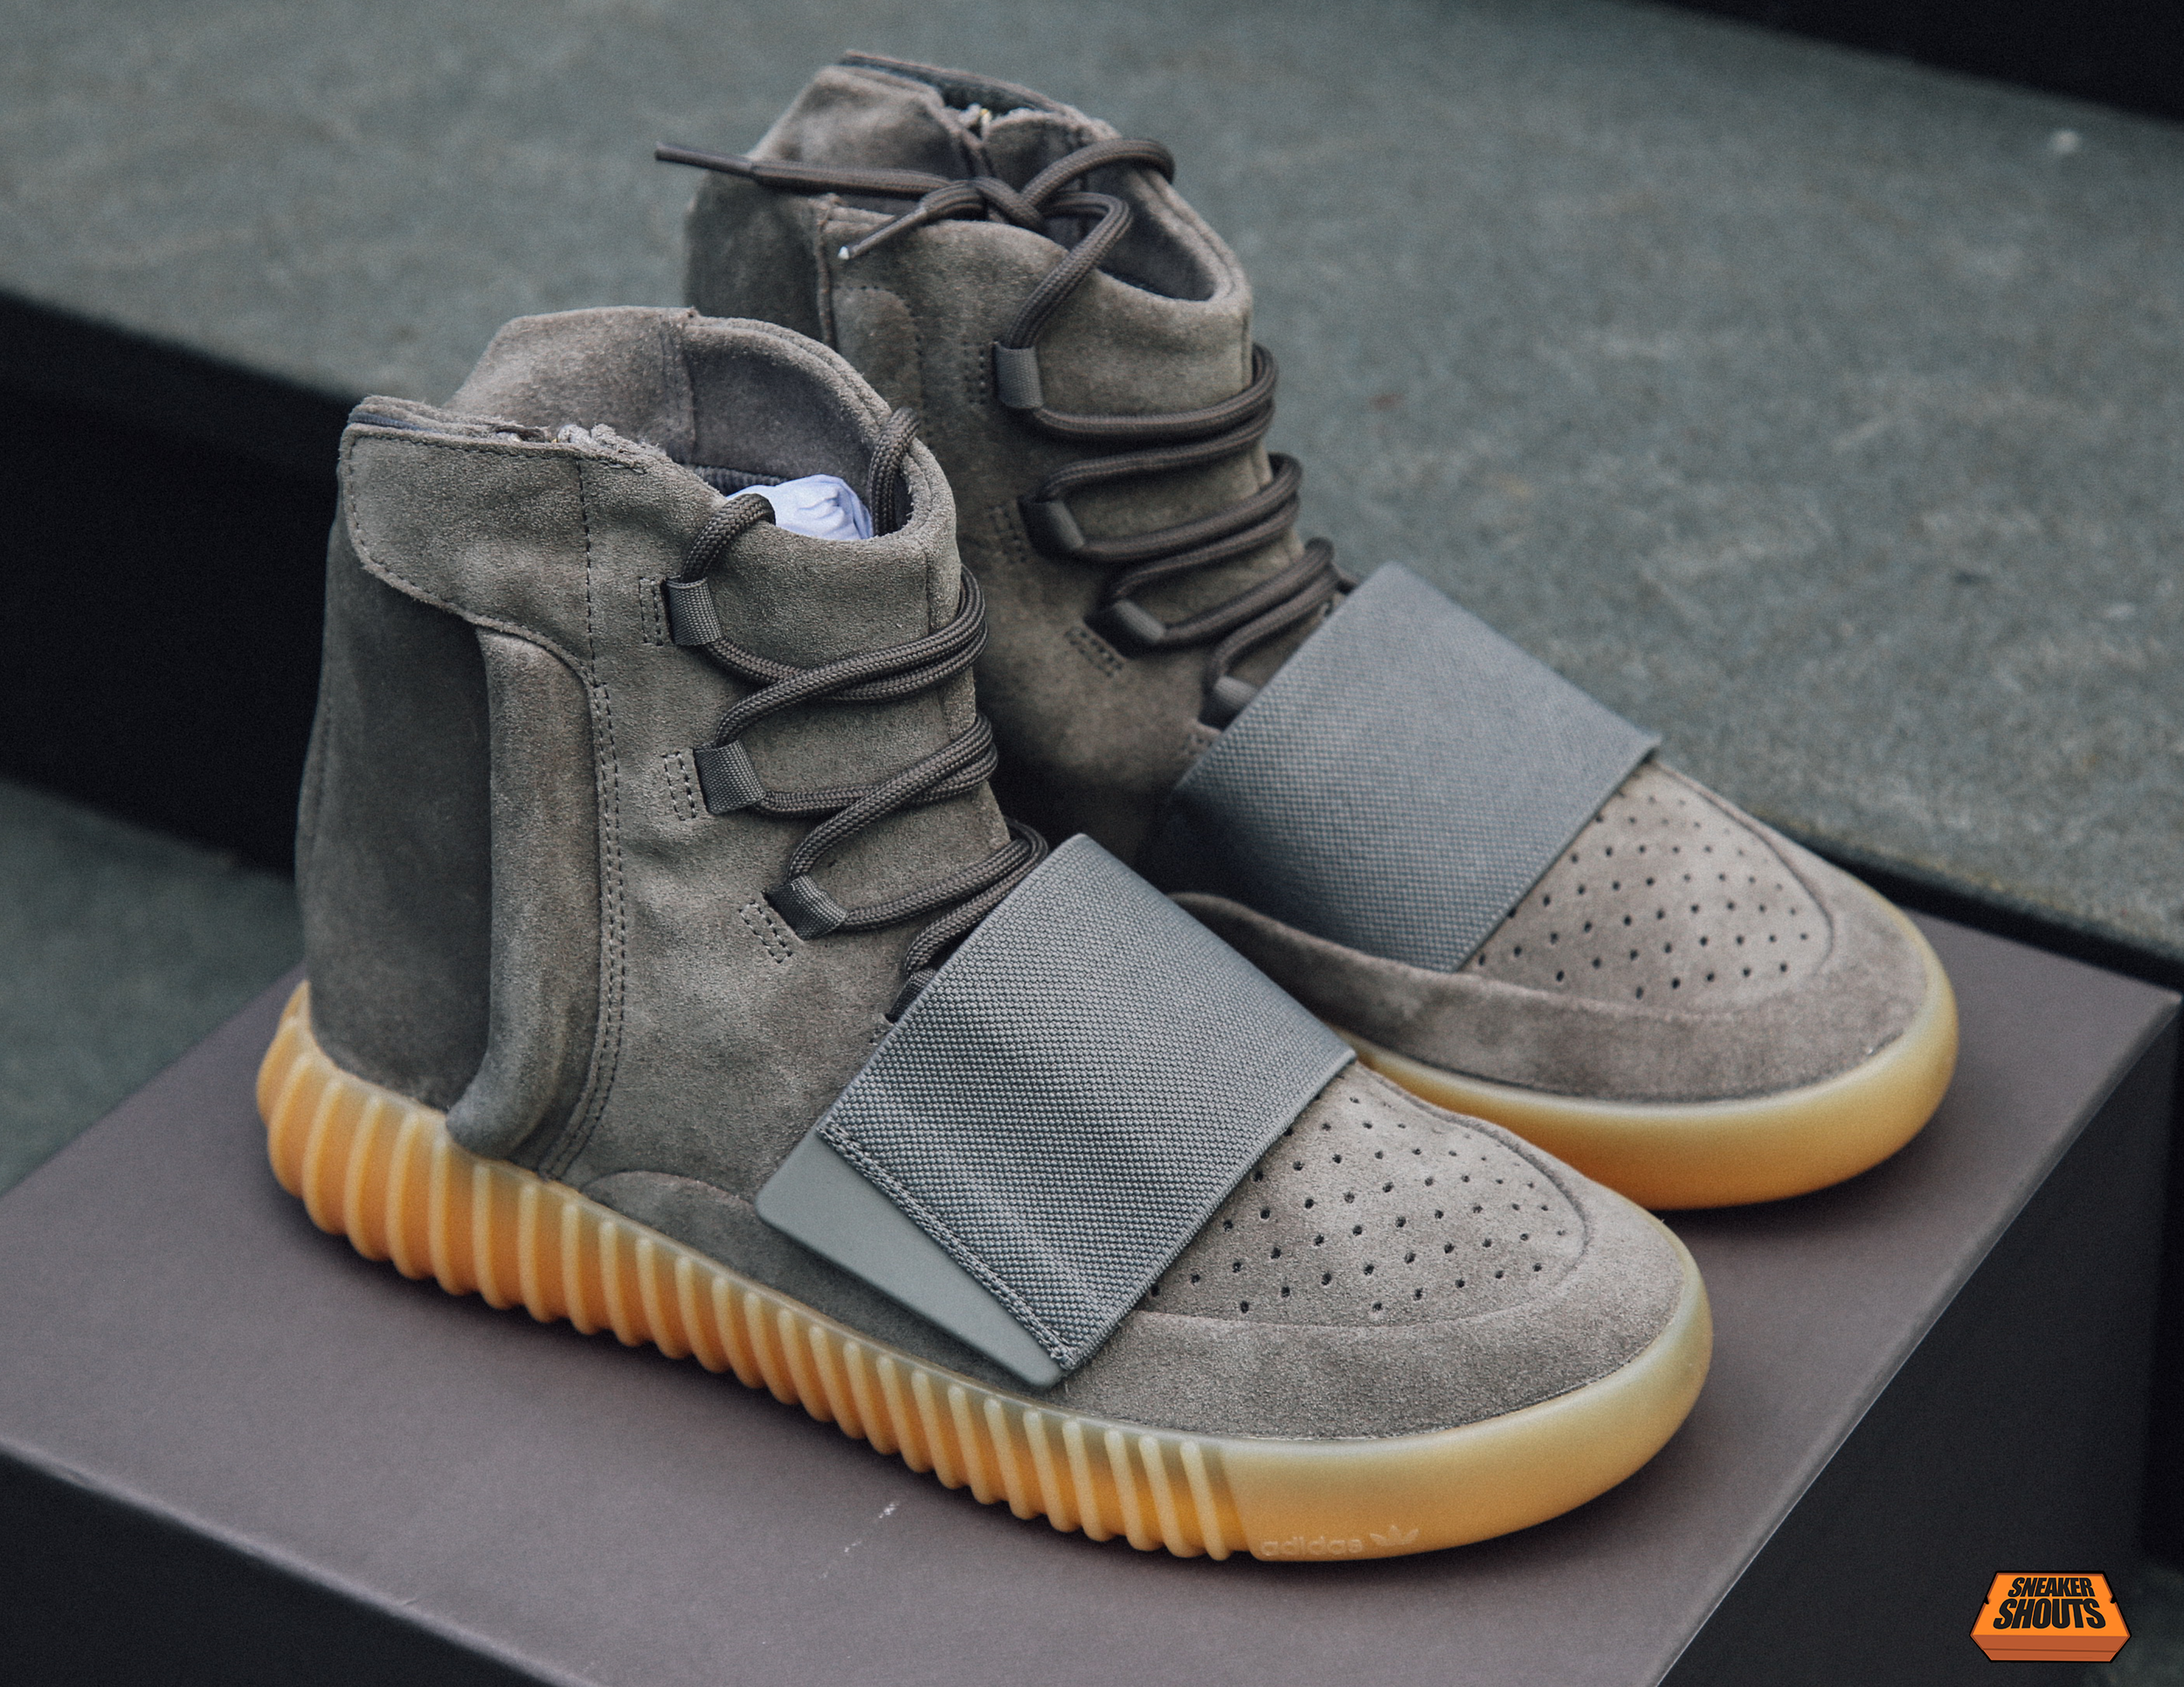 Tagged-Adidas-Yeezy-750-Boost-Light-Grey-Gum-Glow-In-The-Dark-1.png